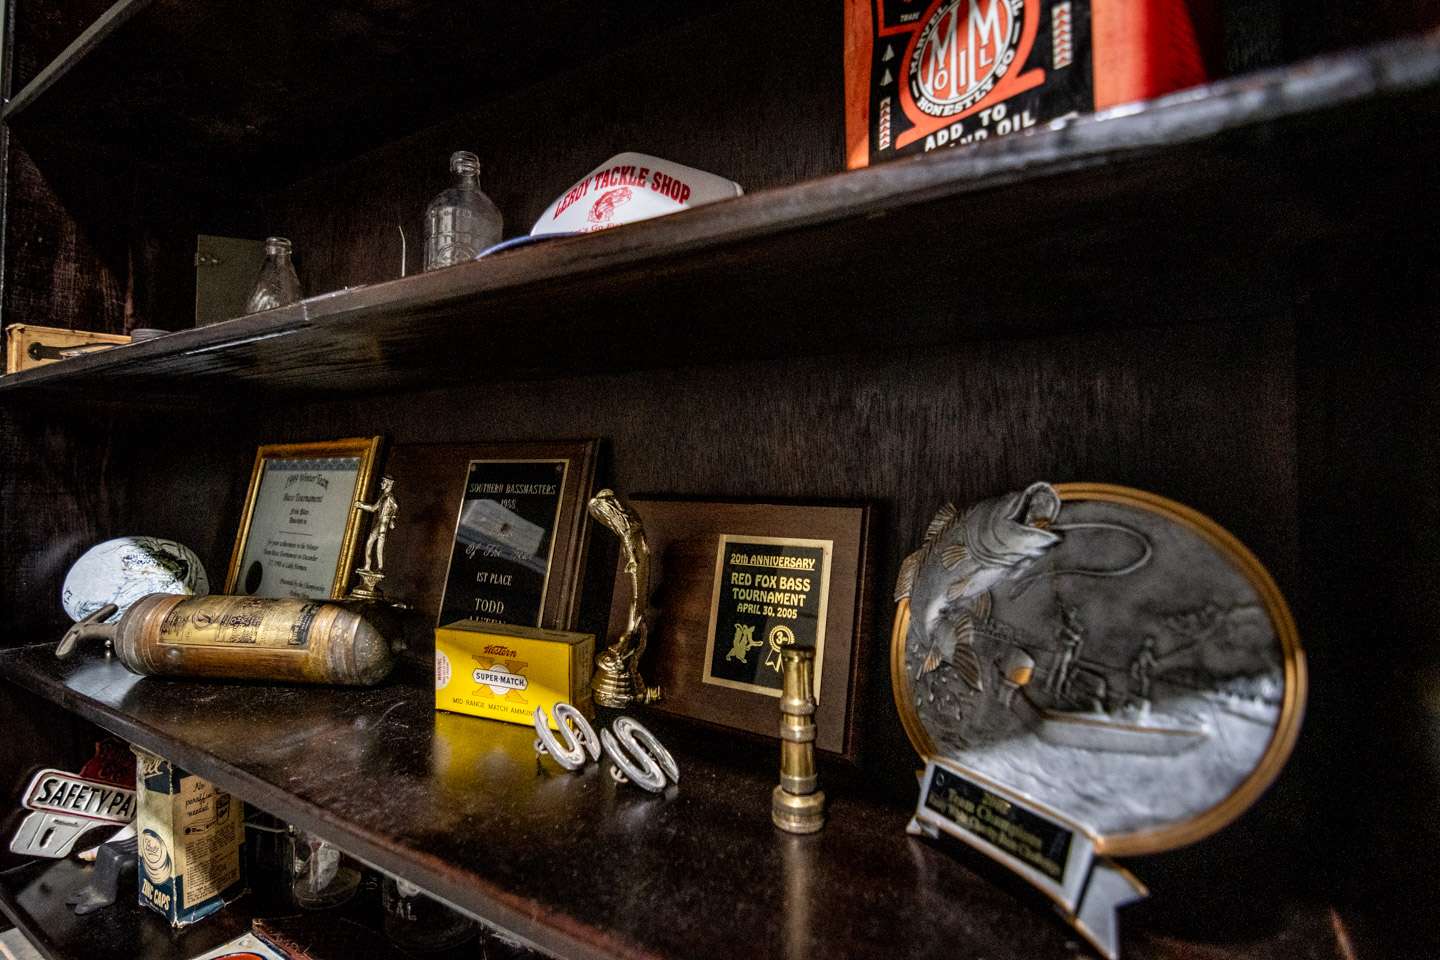 The shelf wouldn’t be complete without a few bass fishing trophies from his long past as a tournament angler. 